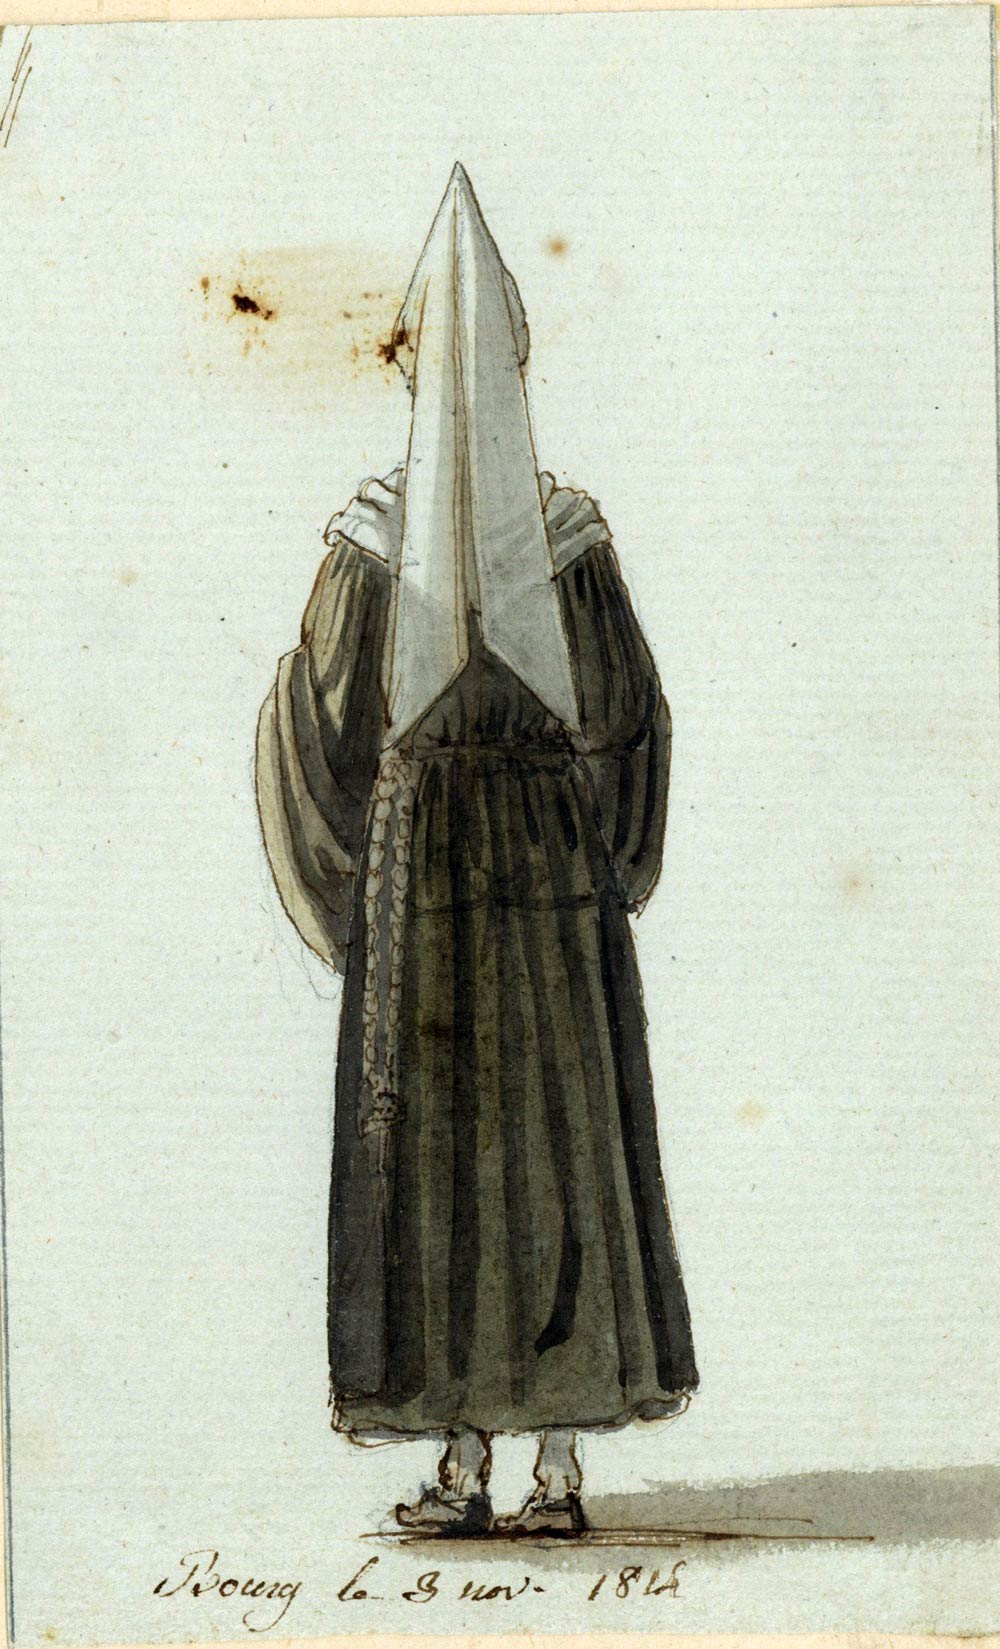 INK AND WATERCOLOR DRAWING on November 8, 1814, Woman of Bourg (?) 